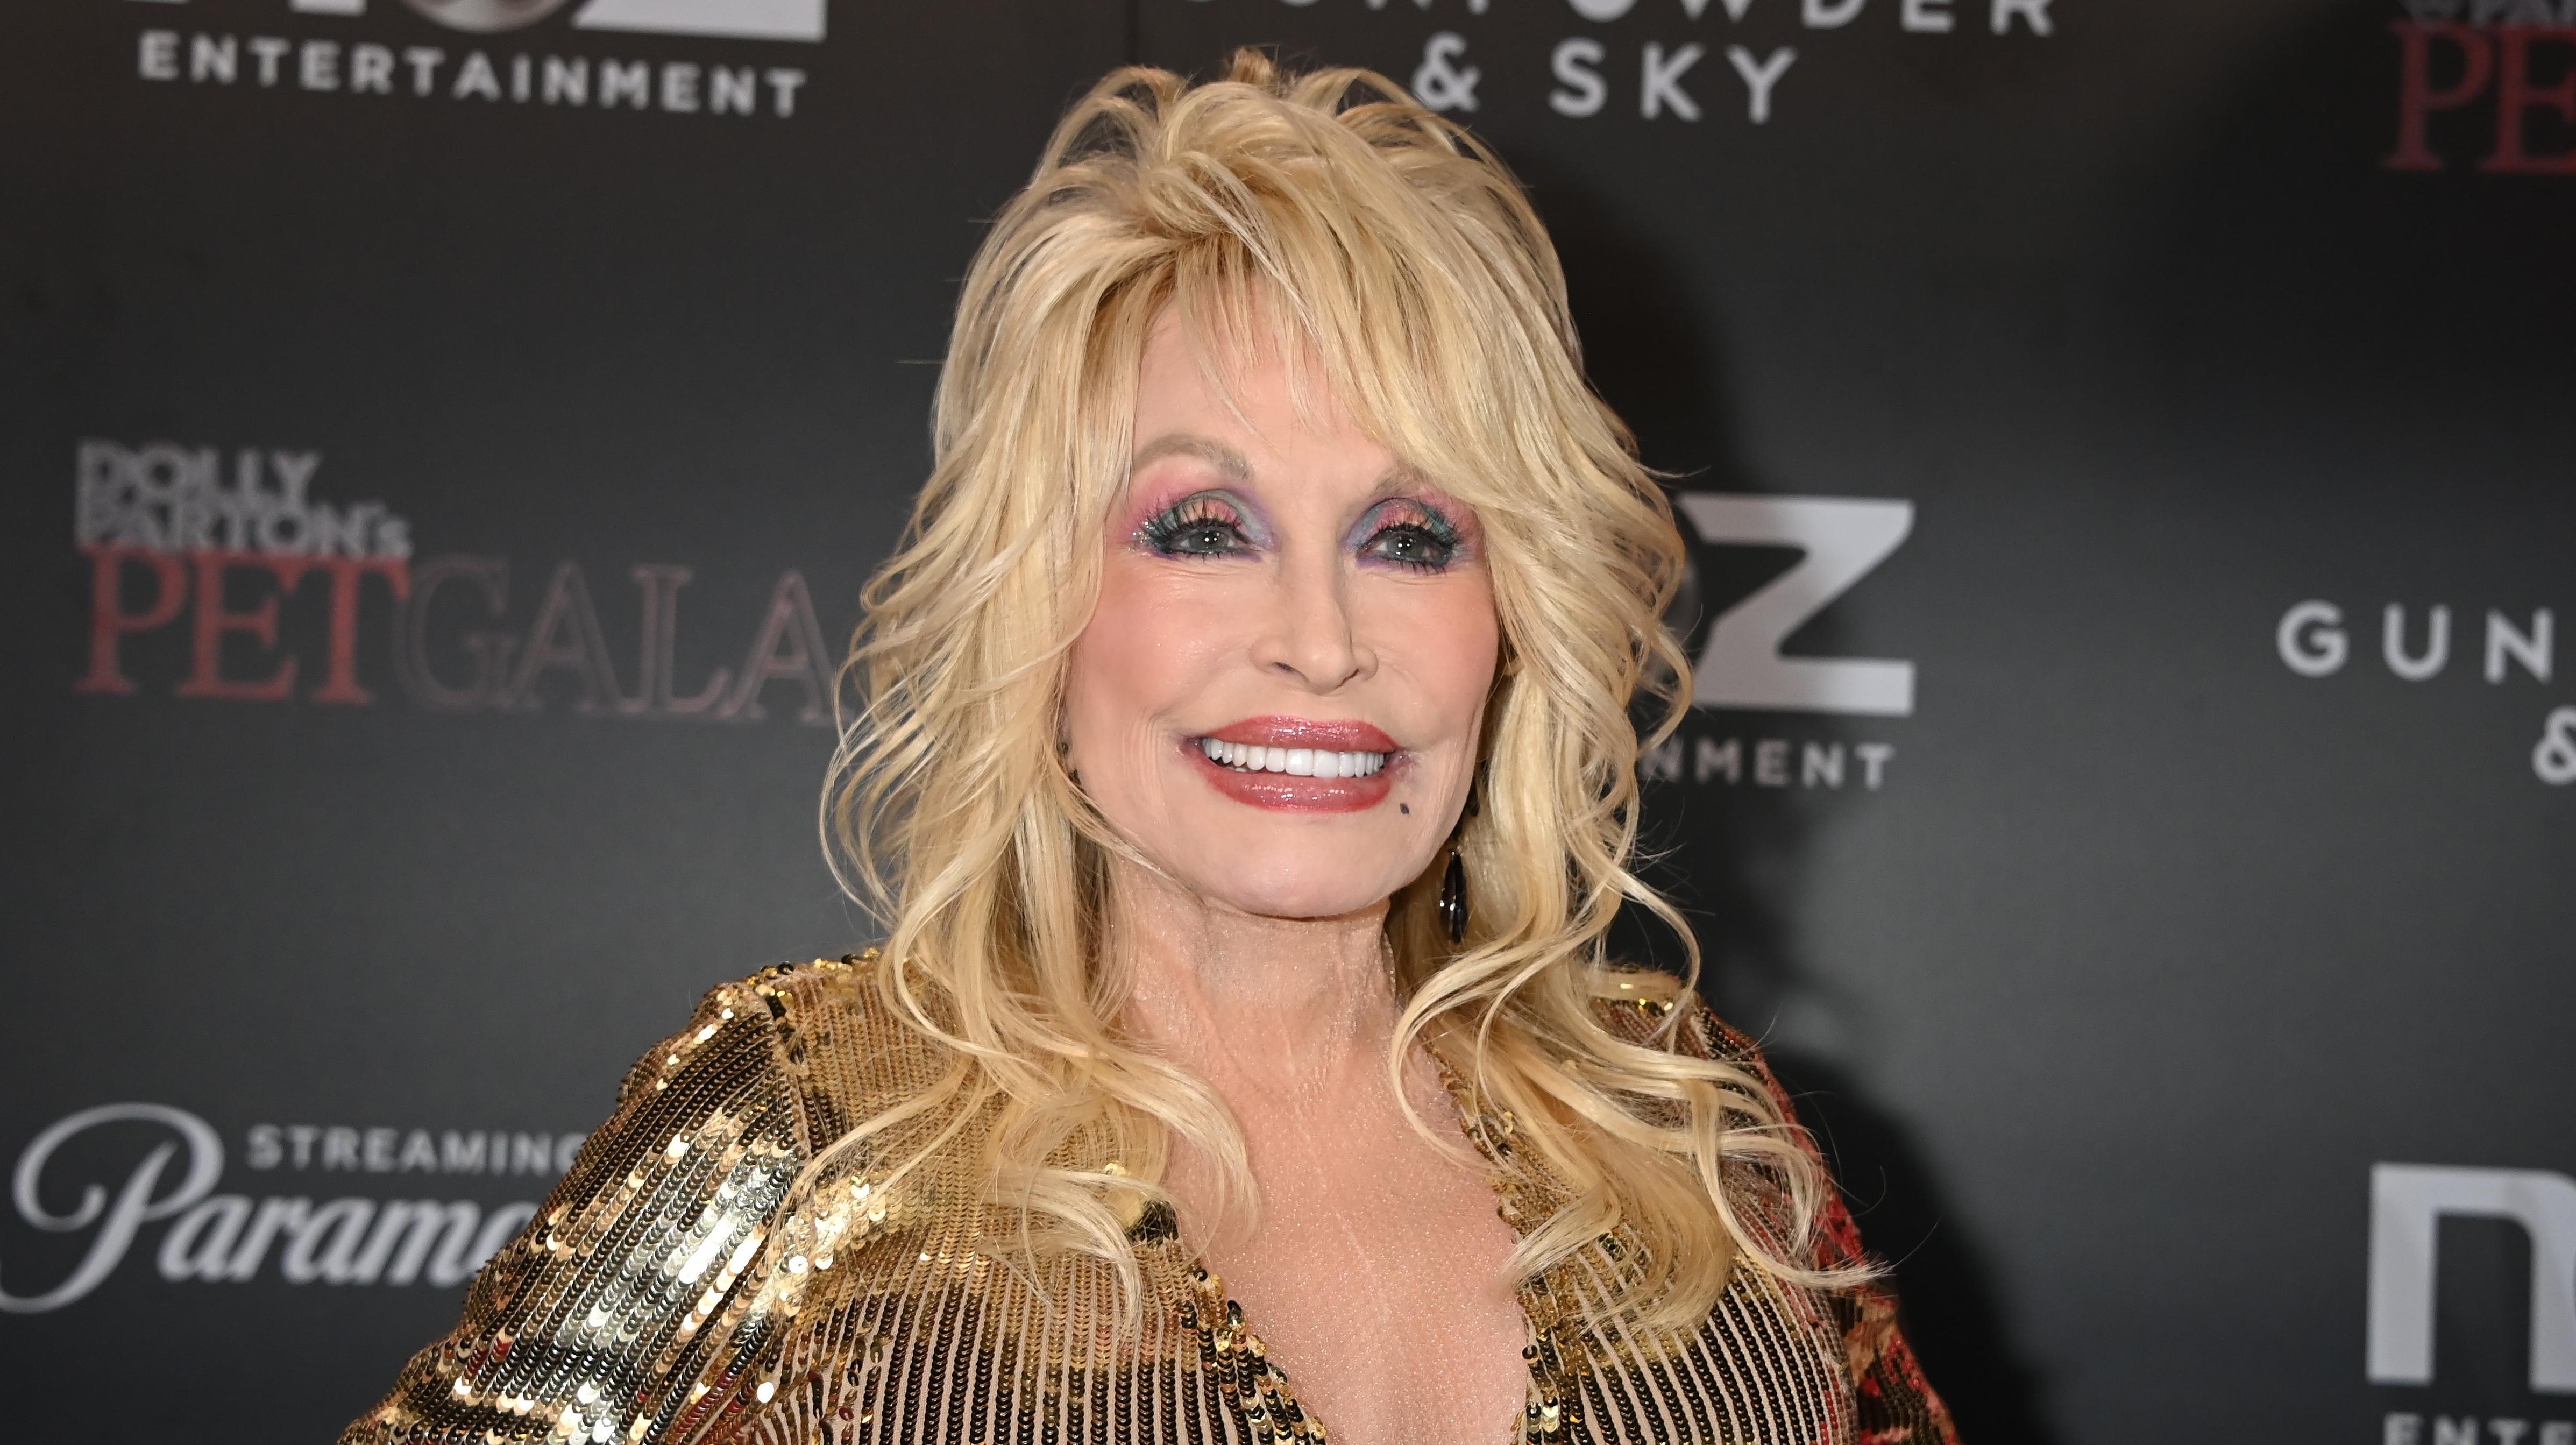 Dolly Parton would do a “Jolene” duet with Beyoncé—but which one?